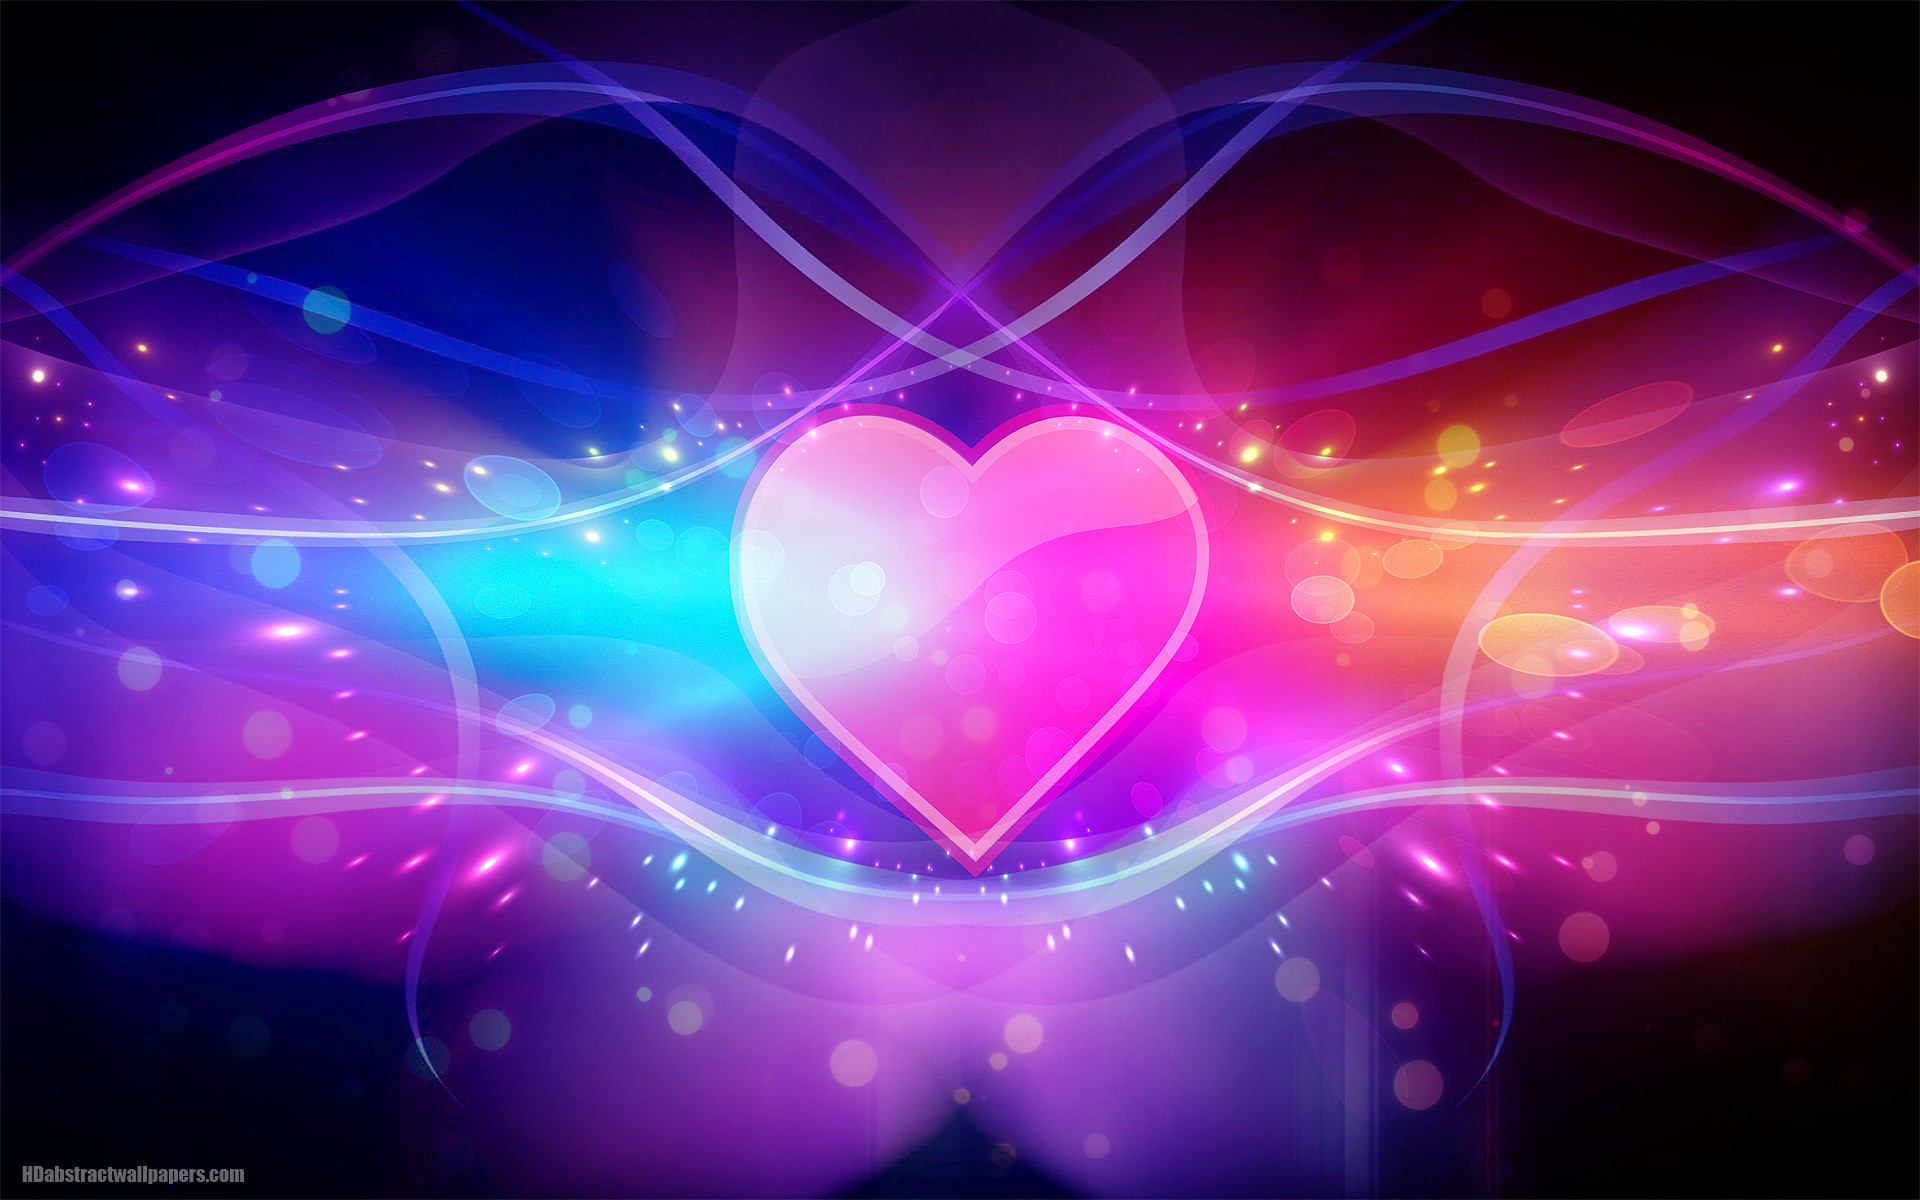 Colorful abstract wallpaper with pink love heart